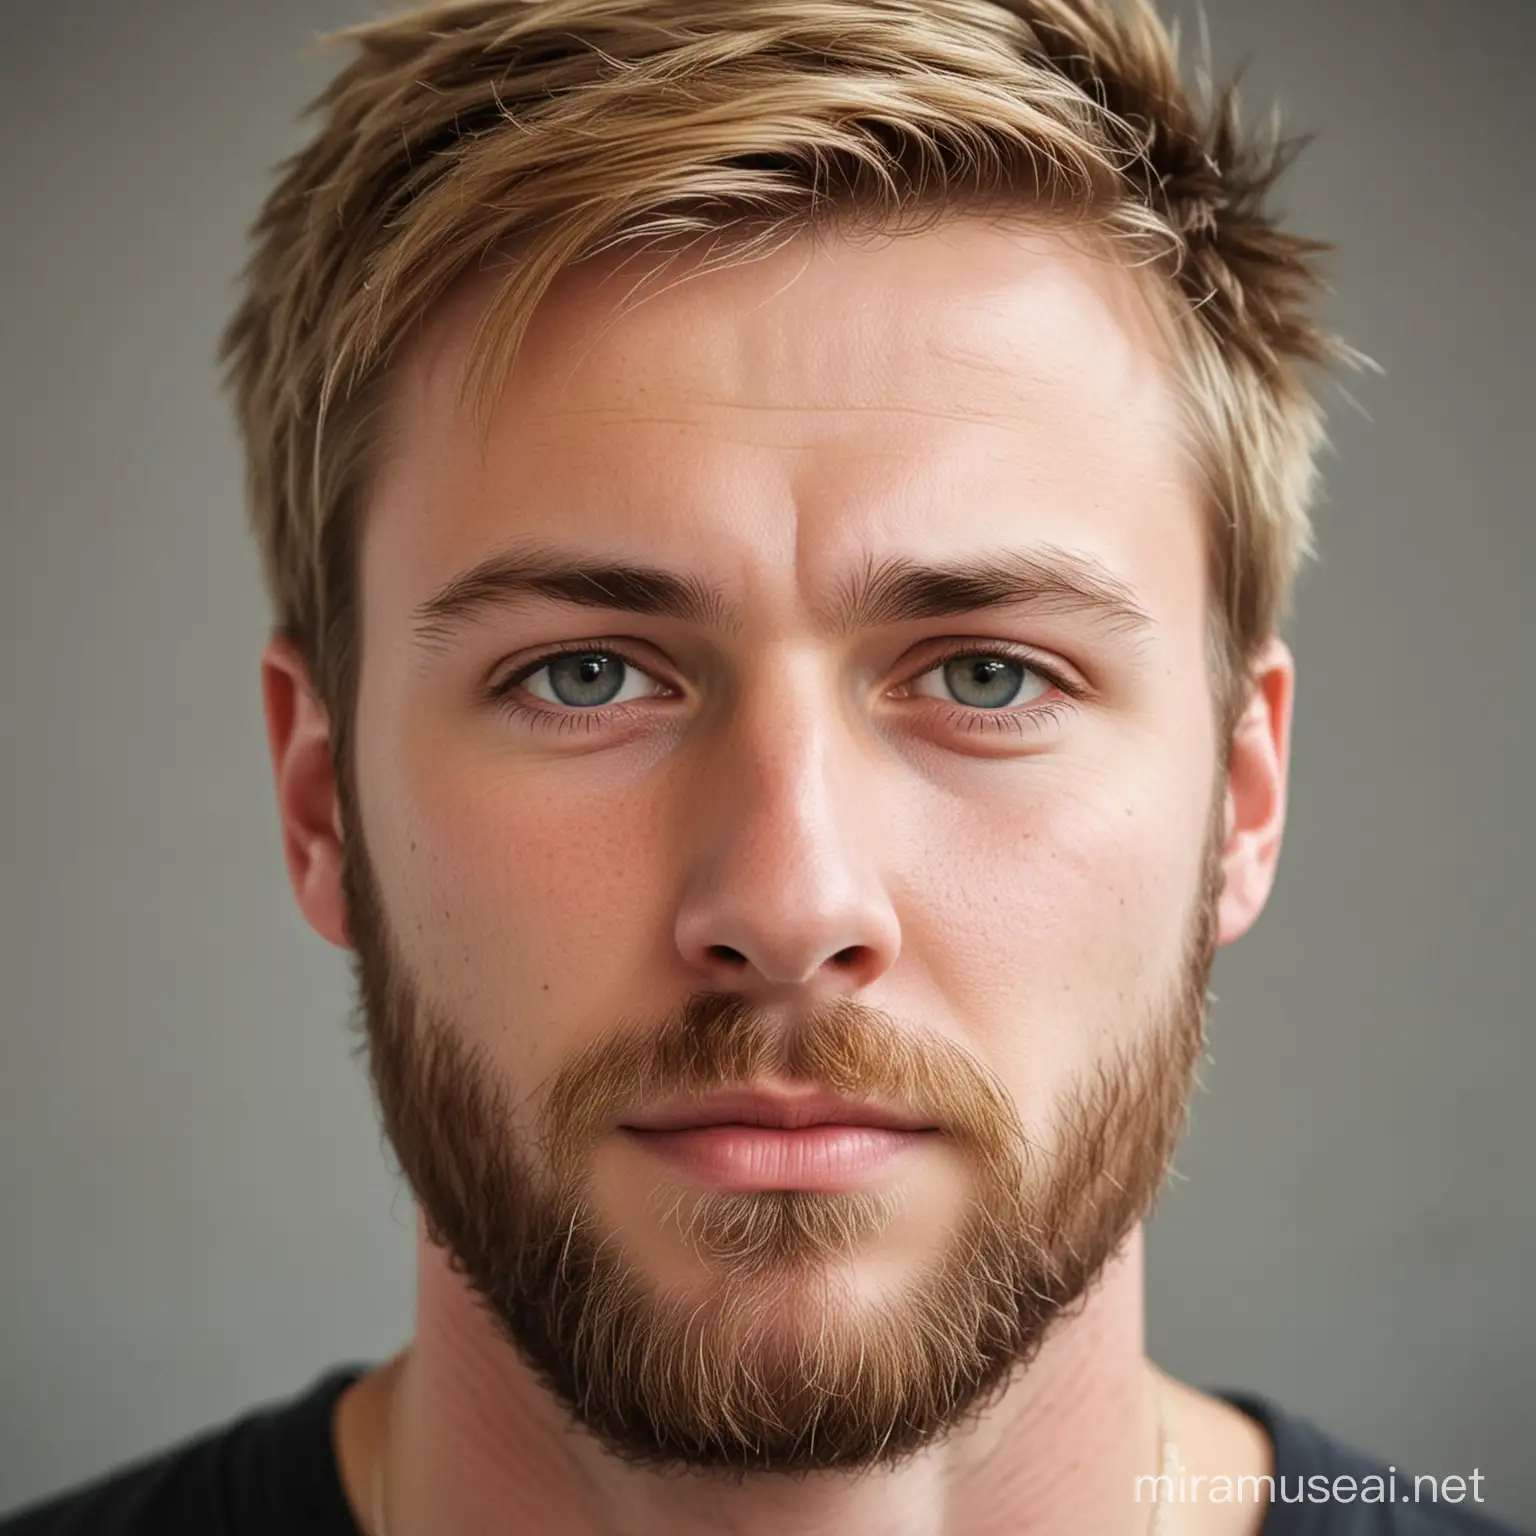 Portrait of a Mid30s Nordic Man with Light Hair and a Beard